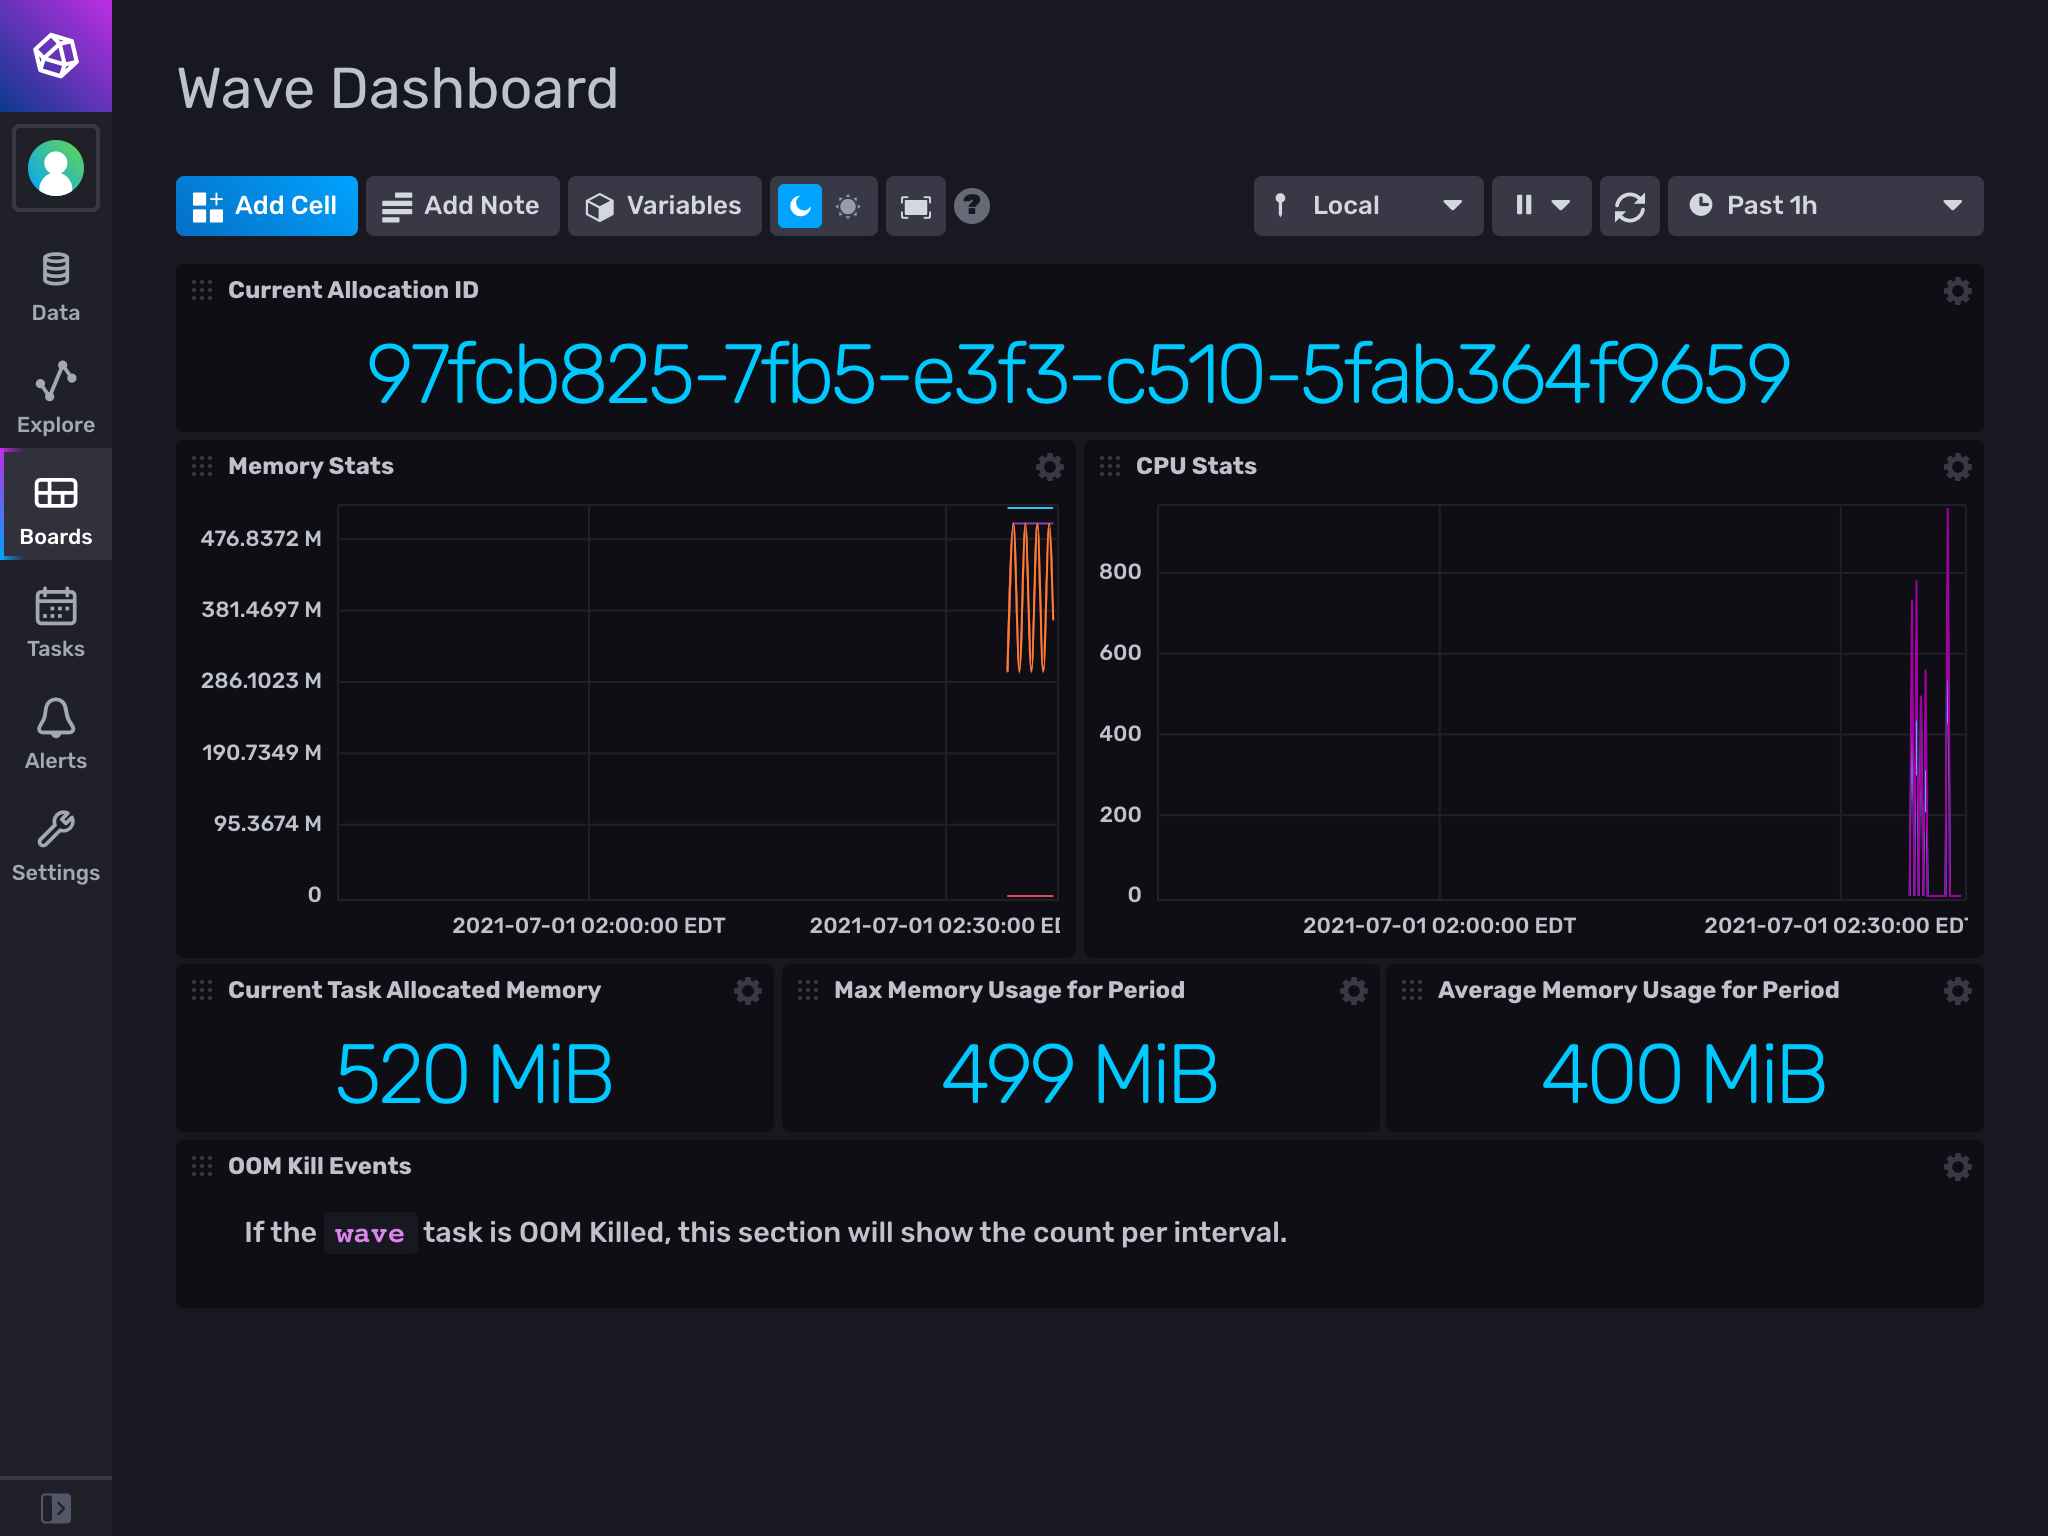 Influx UI with "Wave Dashboard" open